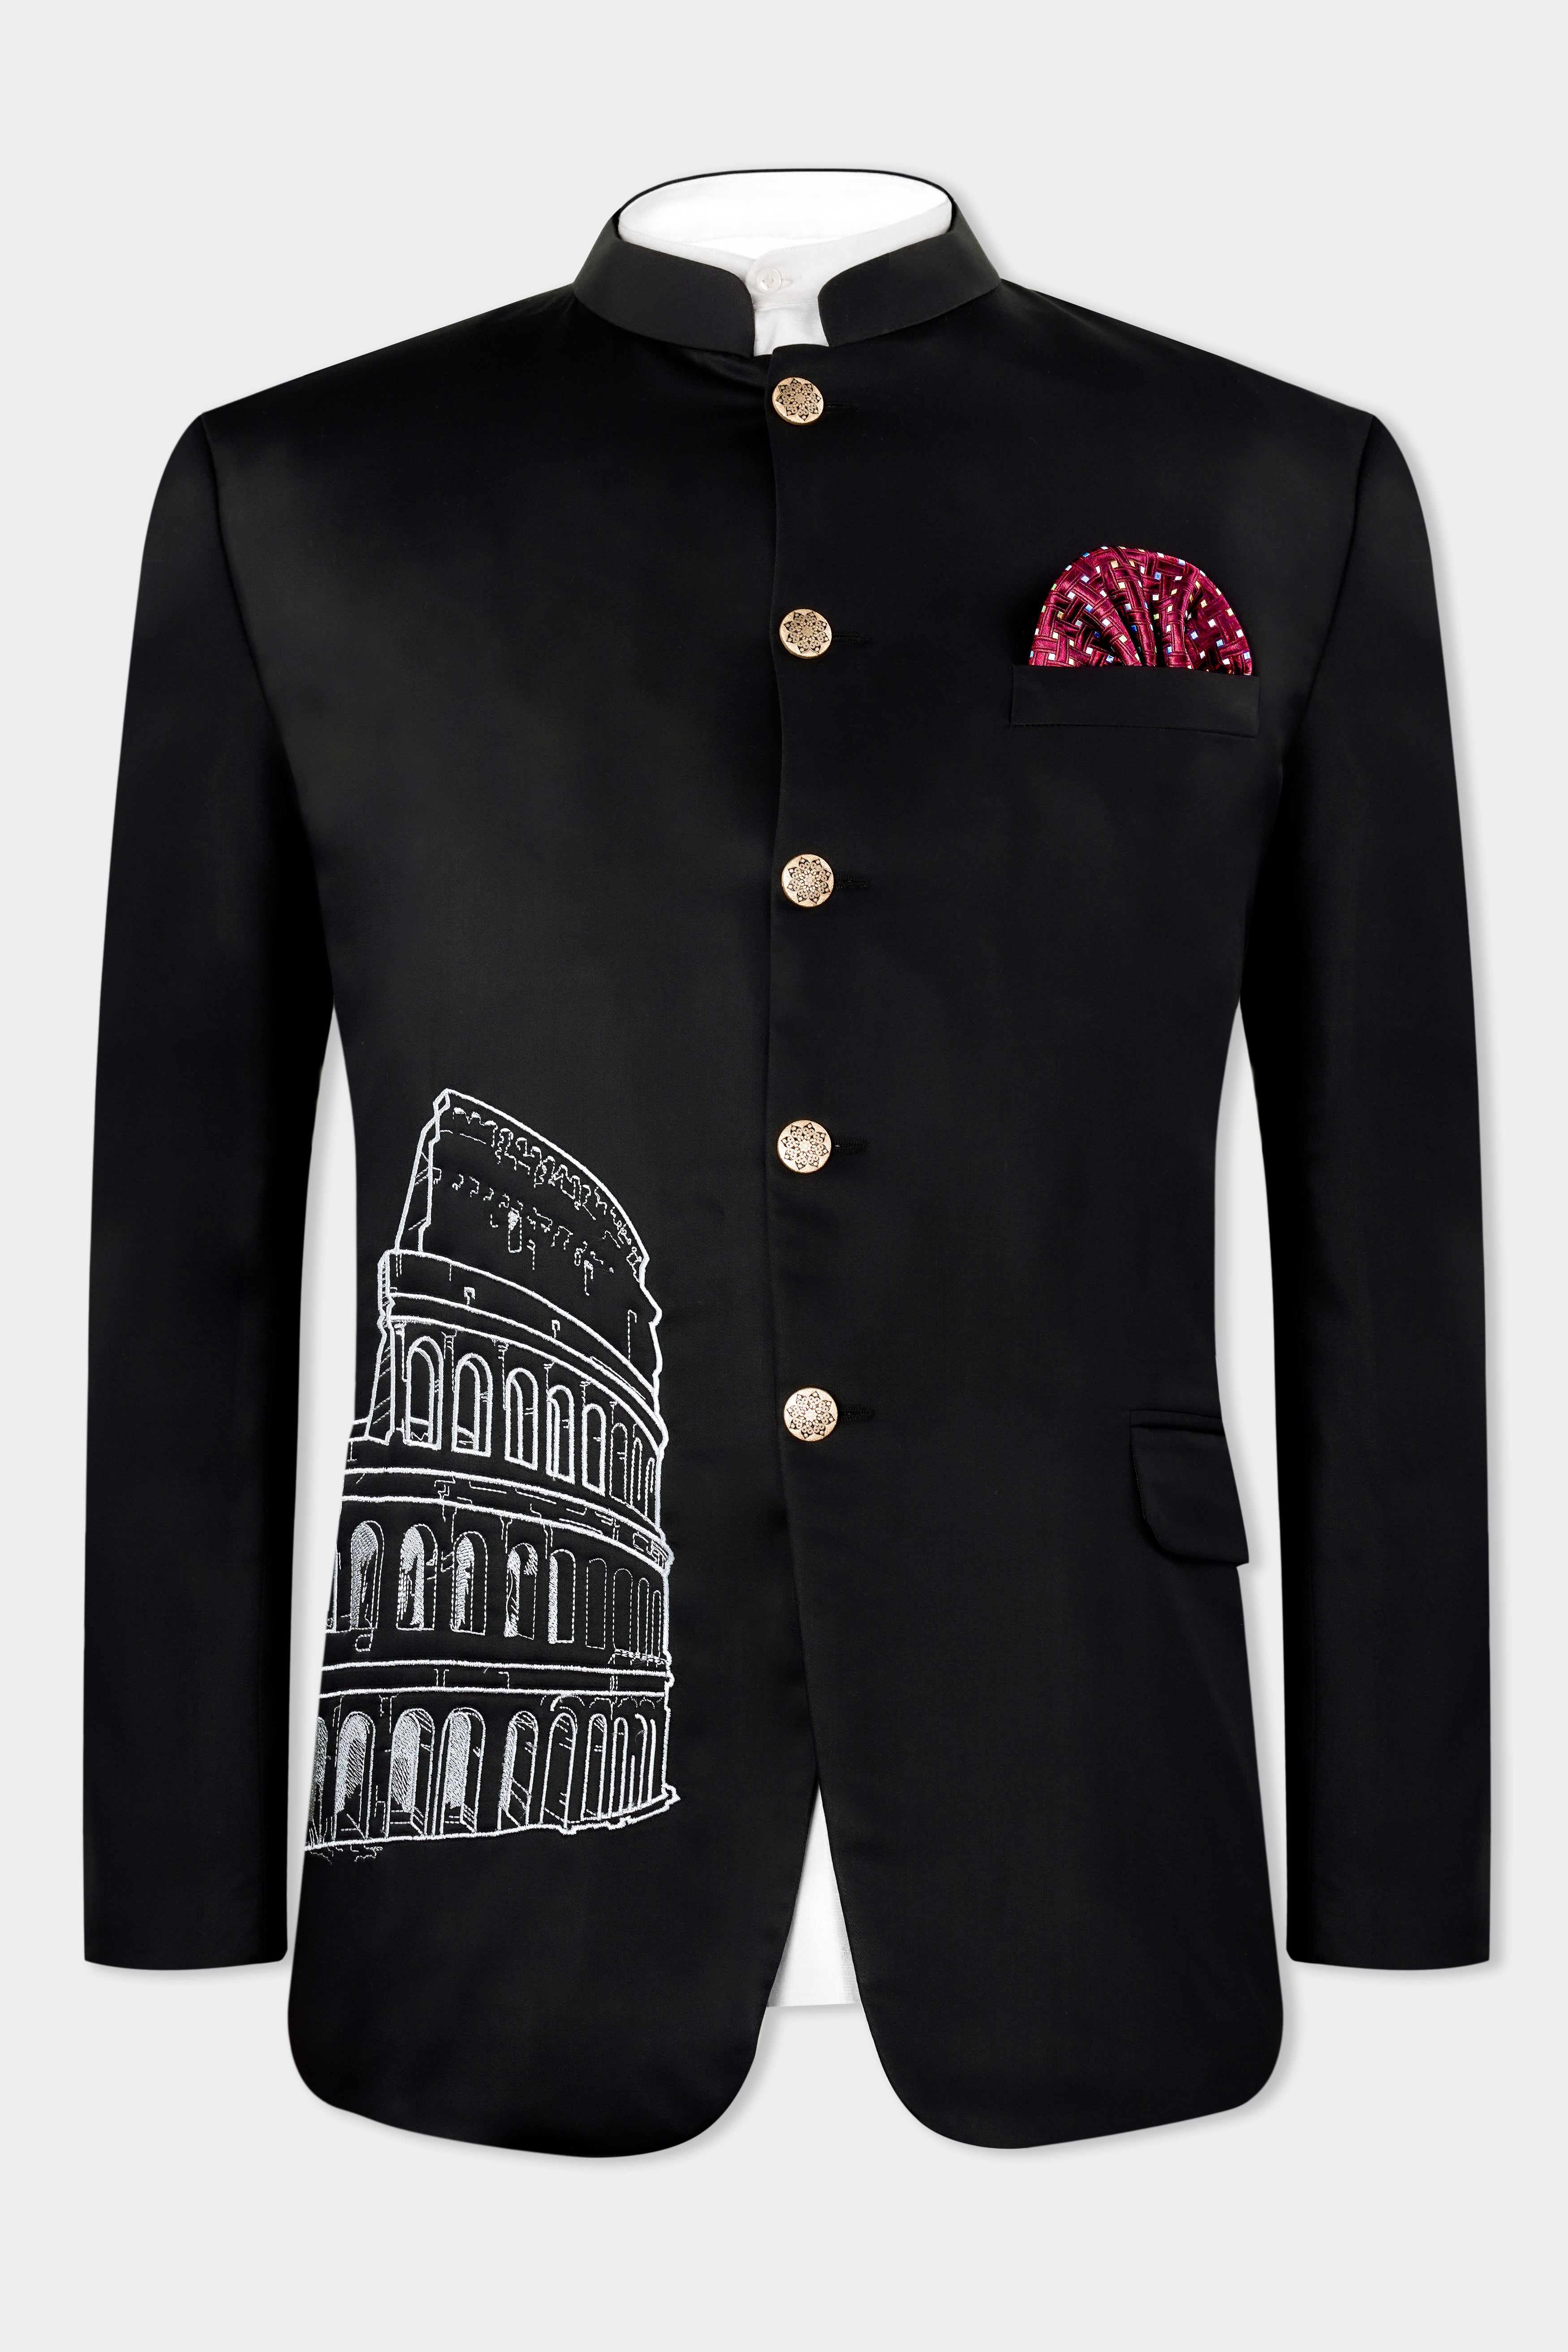 Jade Black Colosseum Embroidered Wool Rich Designer Blazer BL3048-BG-E249-36, BL3048-BG-E249-38, BL3048-BG-E249-40, BL3048-BG-E249-42, BL3048-BG-E249-44, BL3048-BG-E249-46, BL3048-BG-E249-48, BL3048-BG-E249-50, BL3048-BG-E249-52, BL3048-BG-E249-54, BL3048-BG-E249-56, BL3048-BG-E249-58, BL3048-BG-E249-60